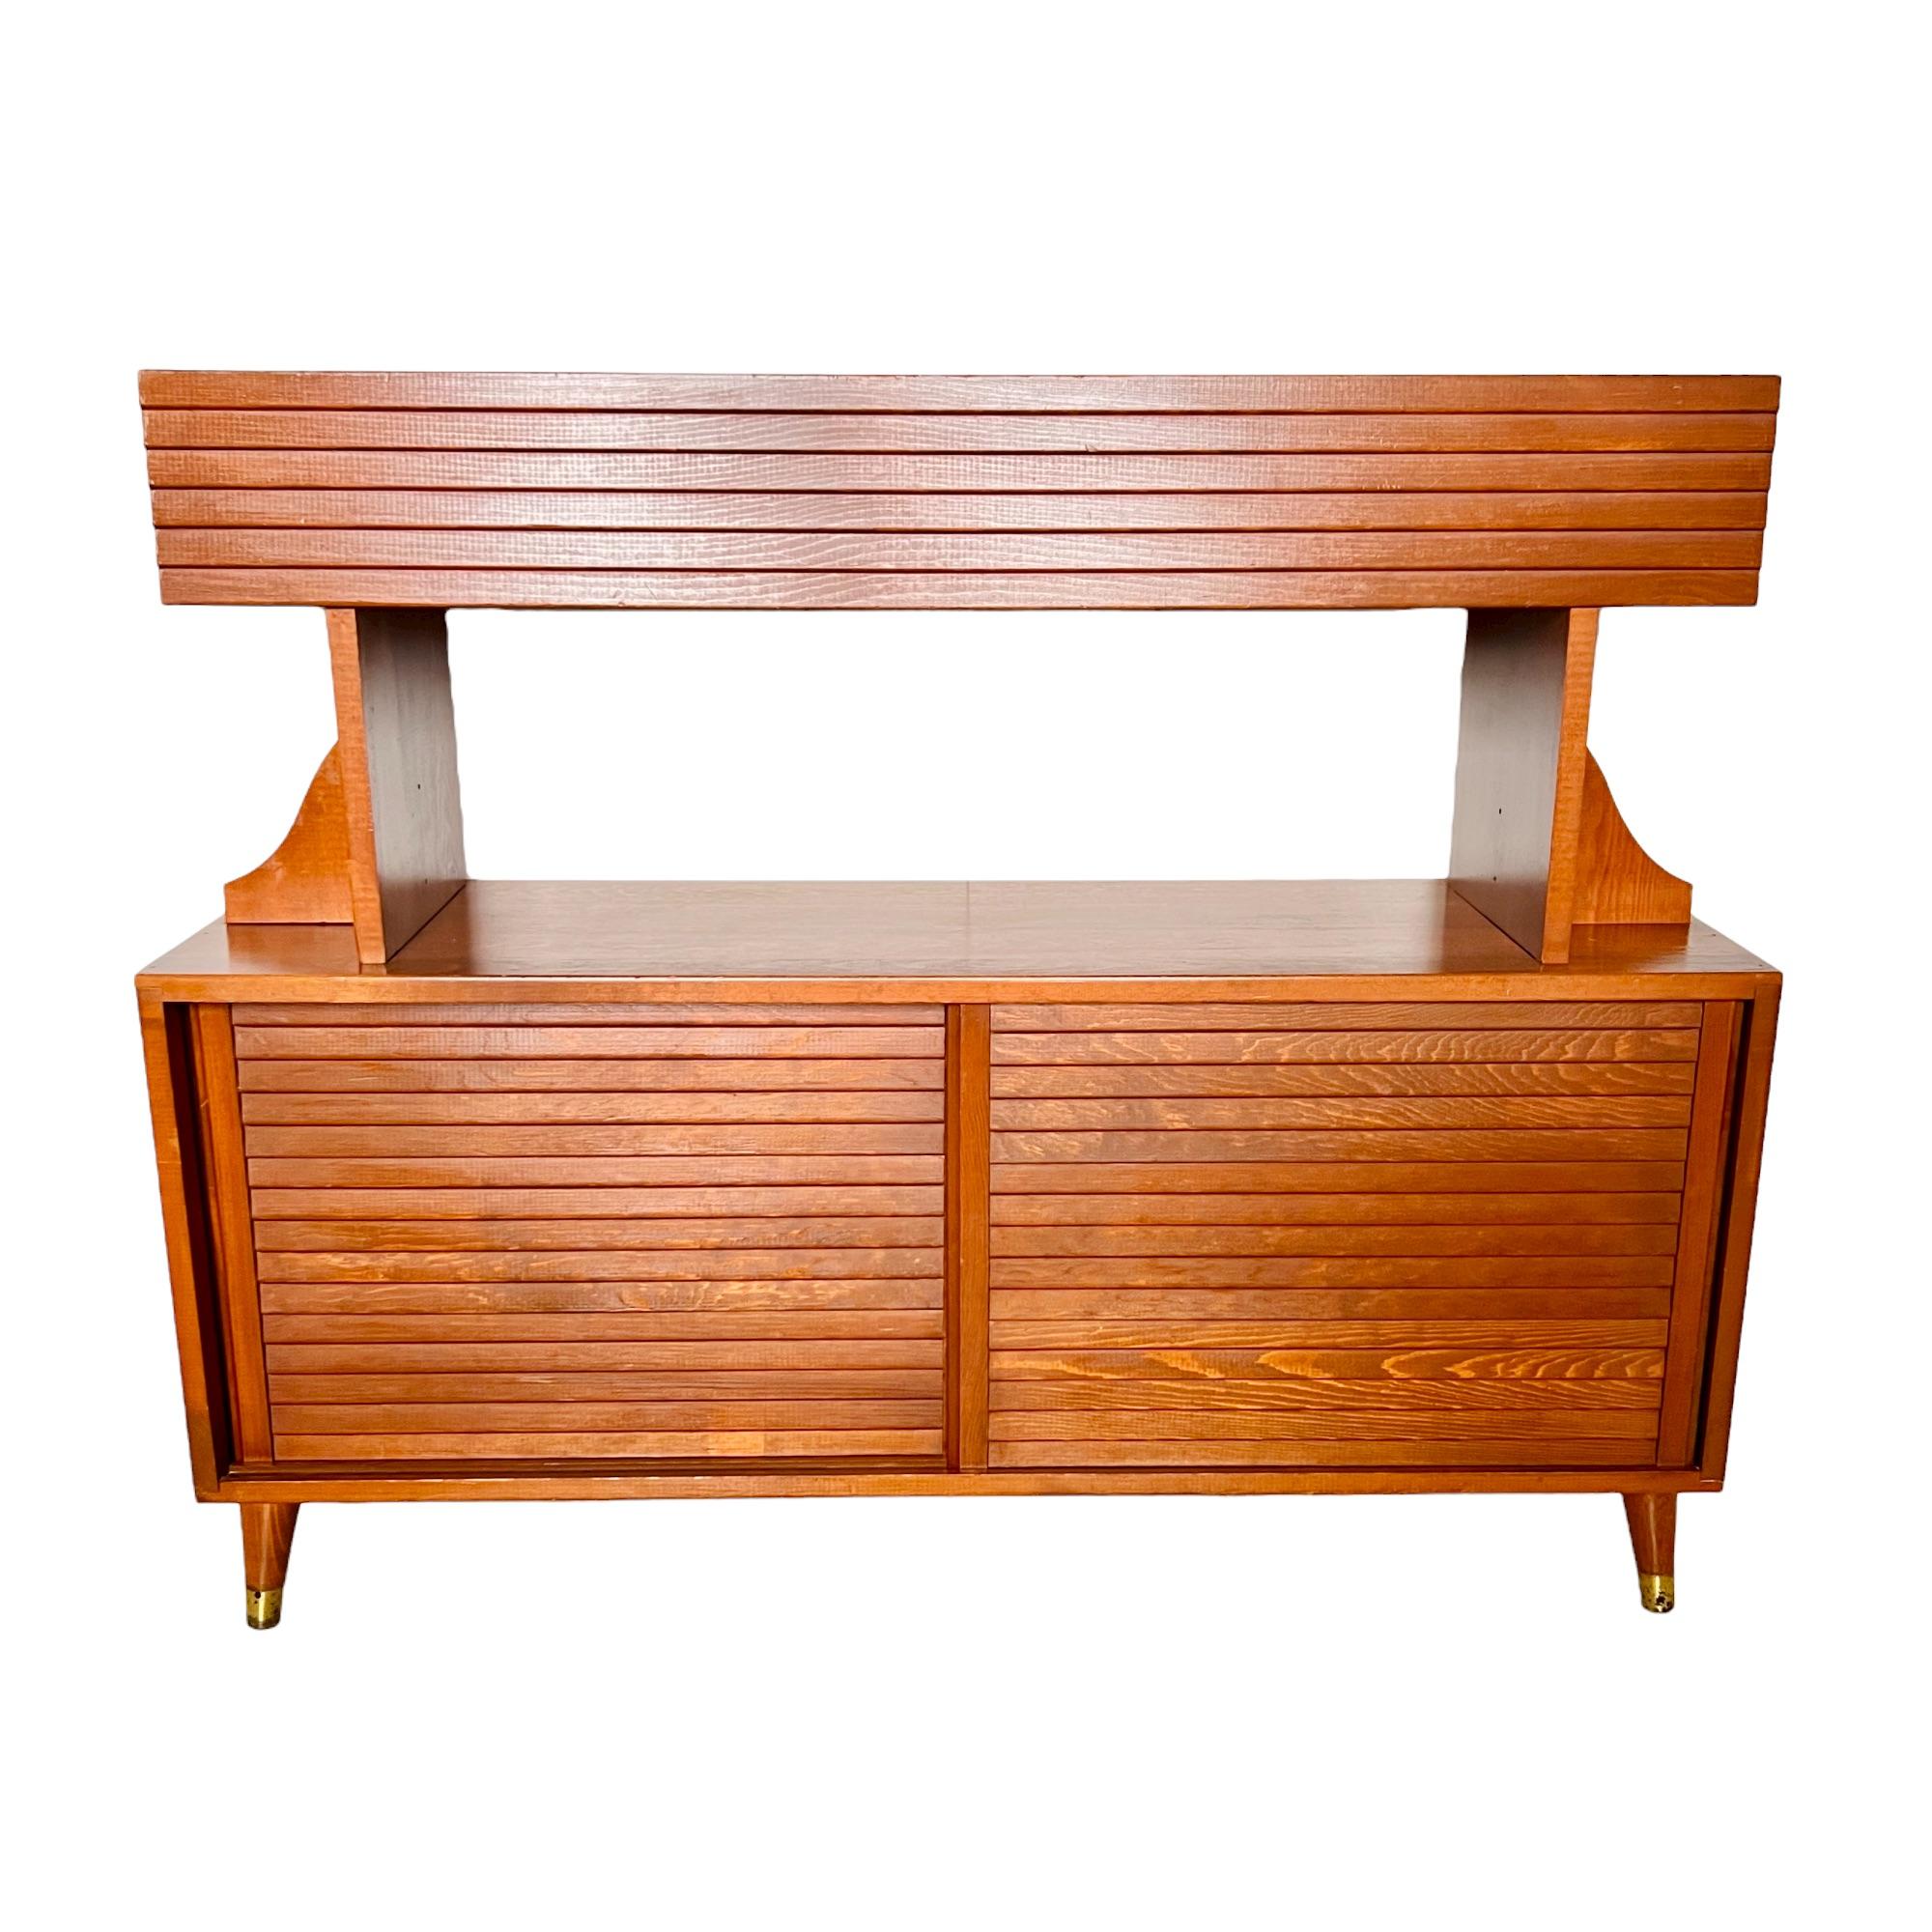 Hand-Crafted Mid-Century Modern Teak Tambour Credenza with Floating Shelf